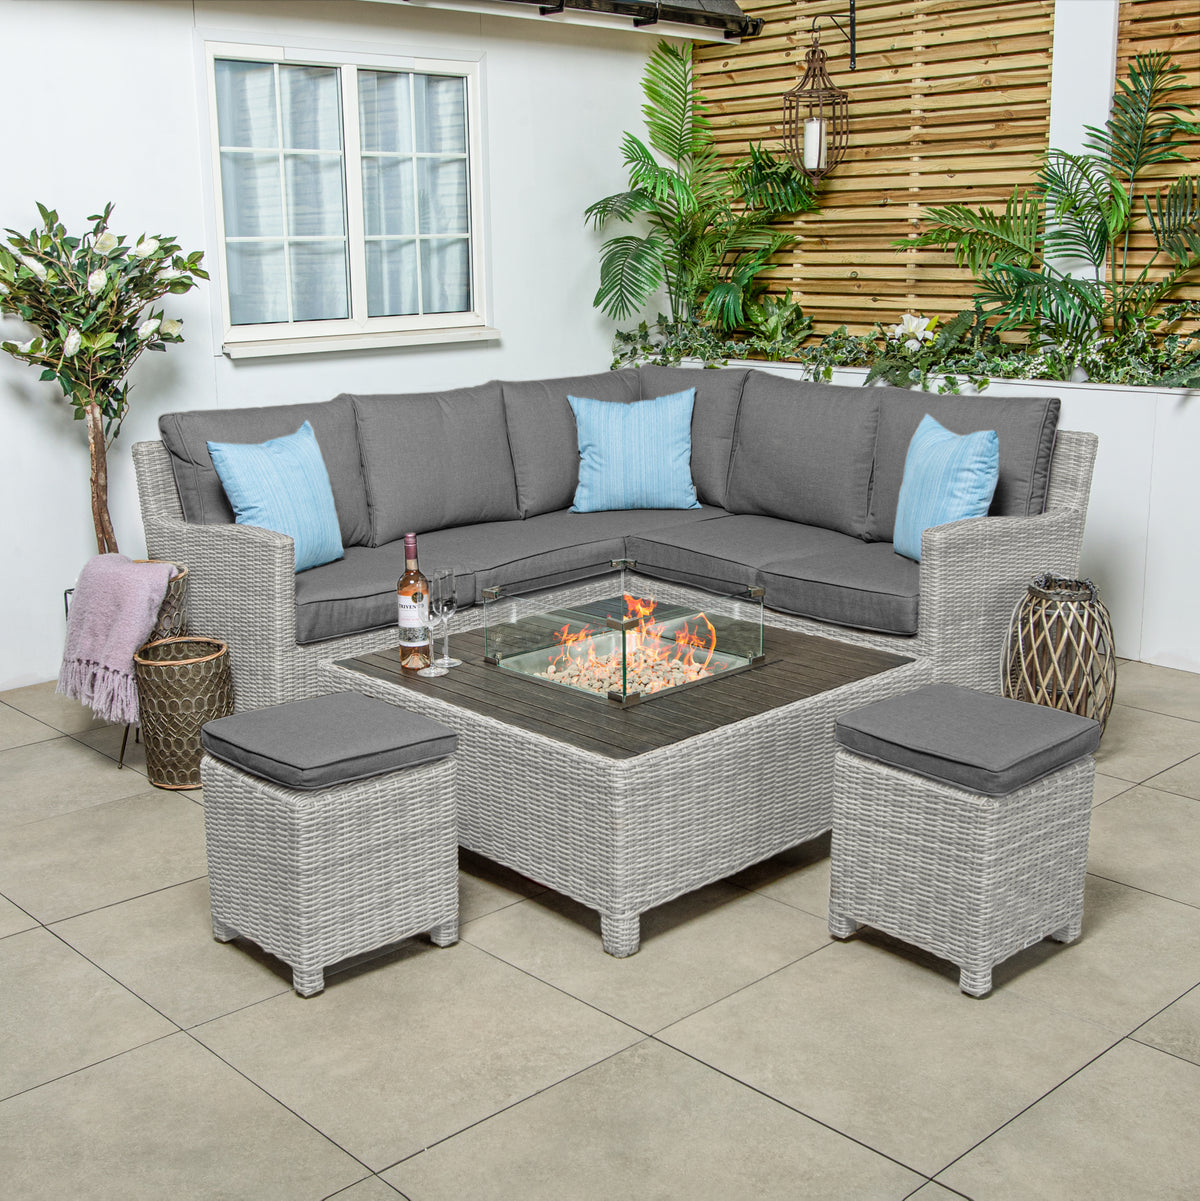 Kettler Palma Mini Corner Whitewash Wicker Outdoor Sofa Set with Low Fire Pit Table